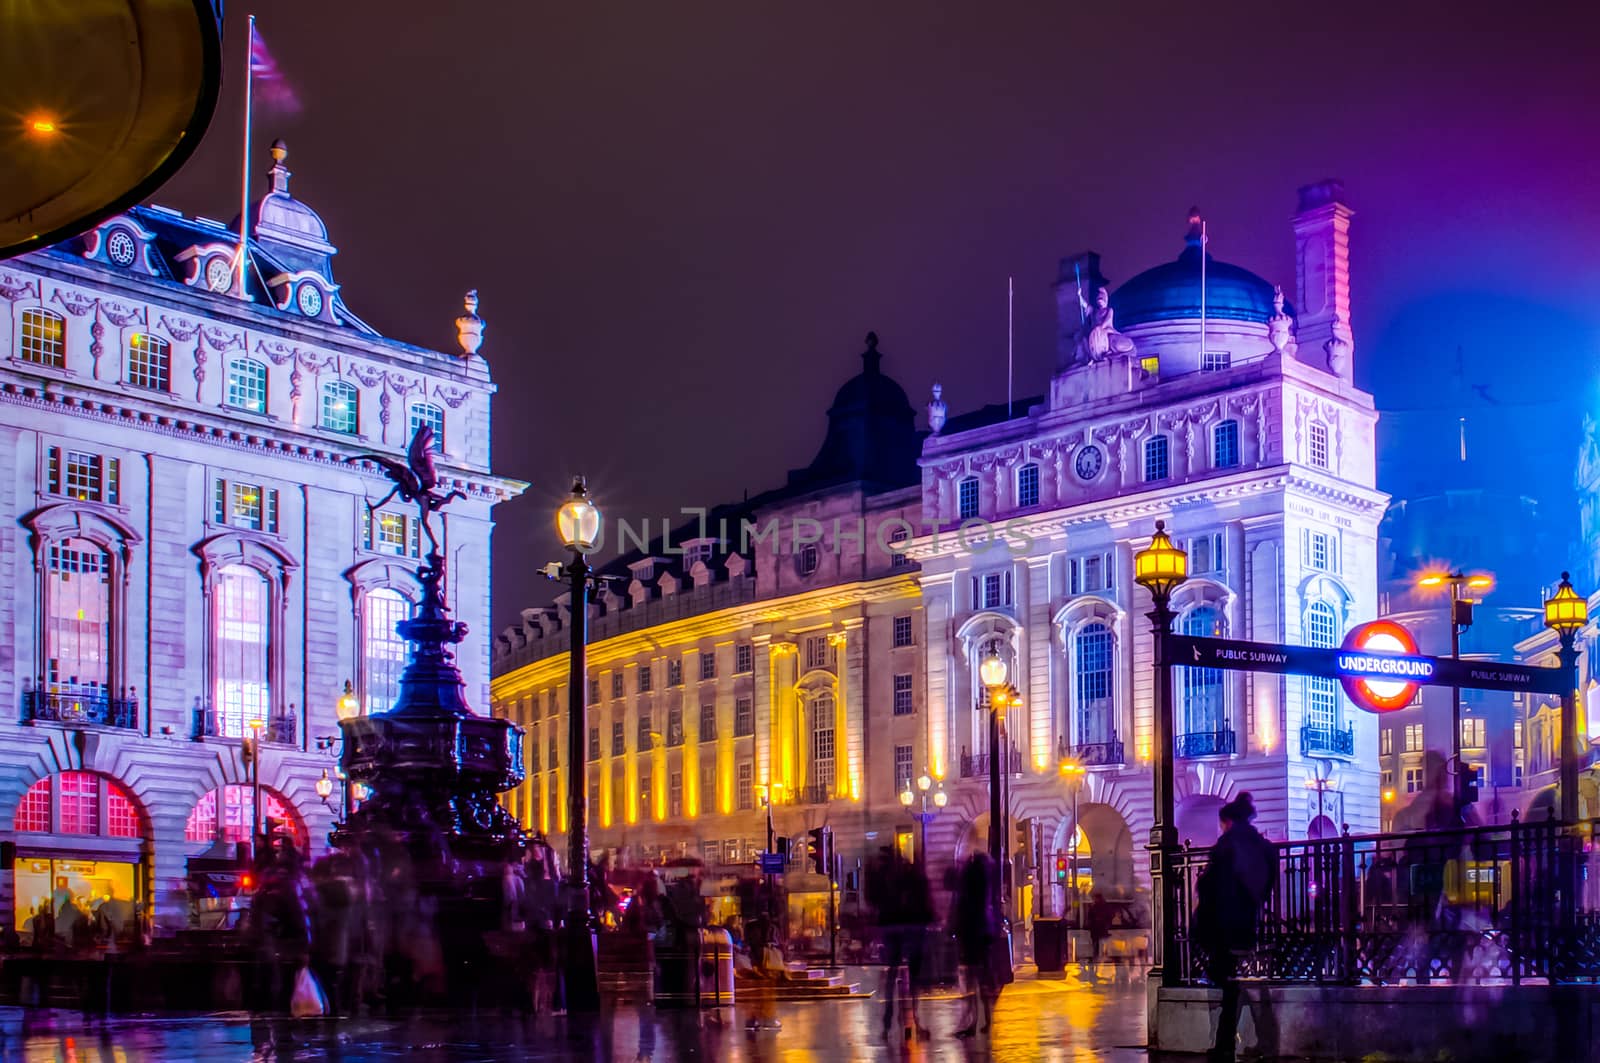 Piccadilly Circus at Night by PhotoLondonUK